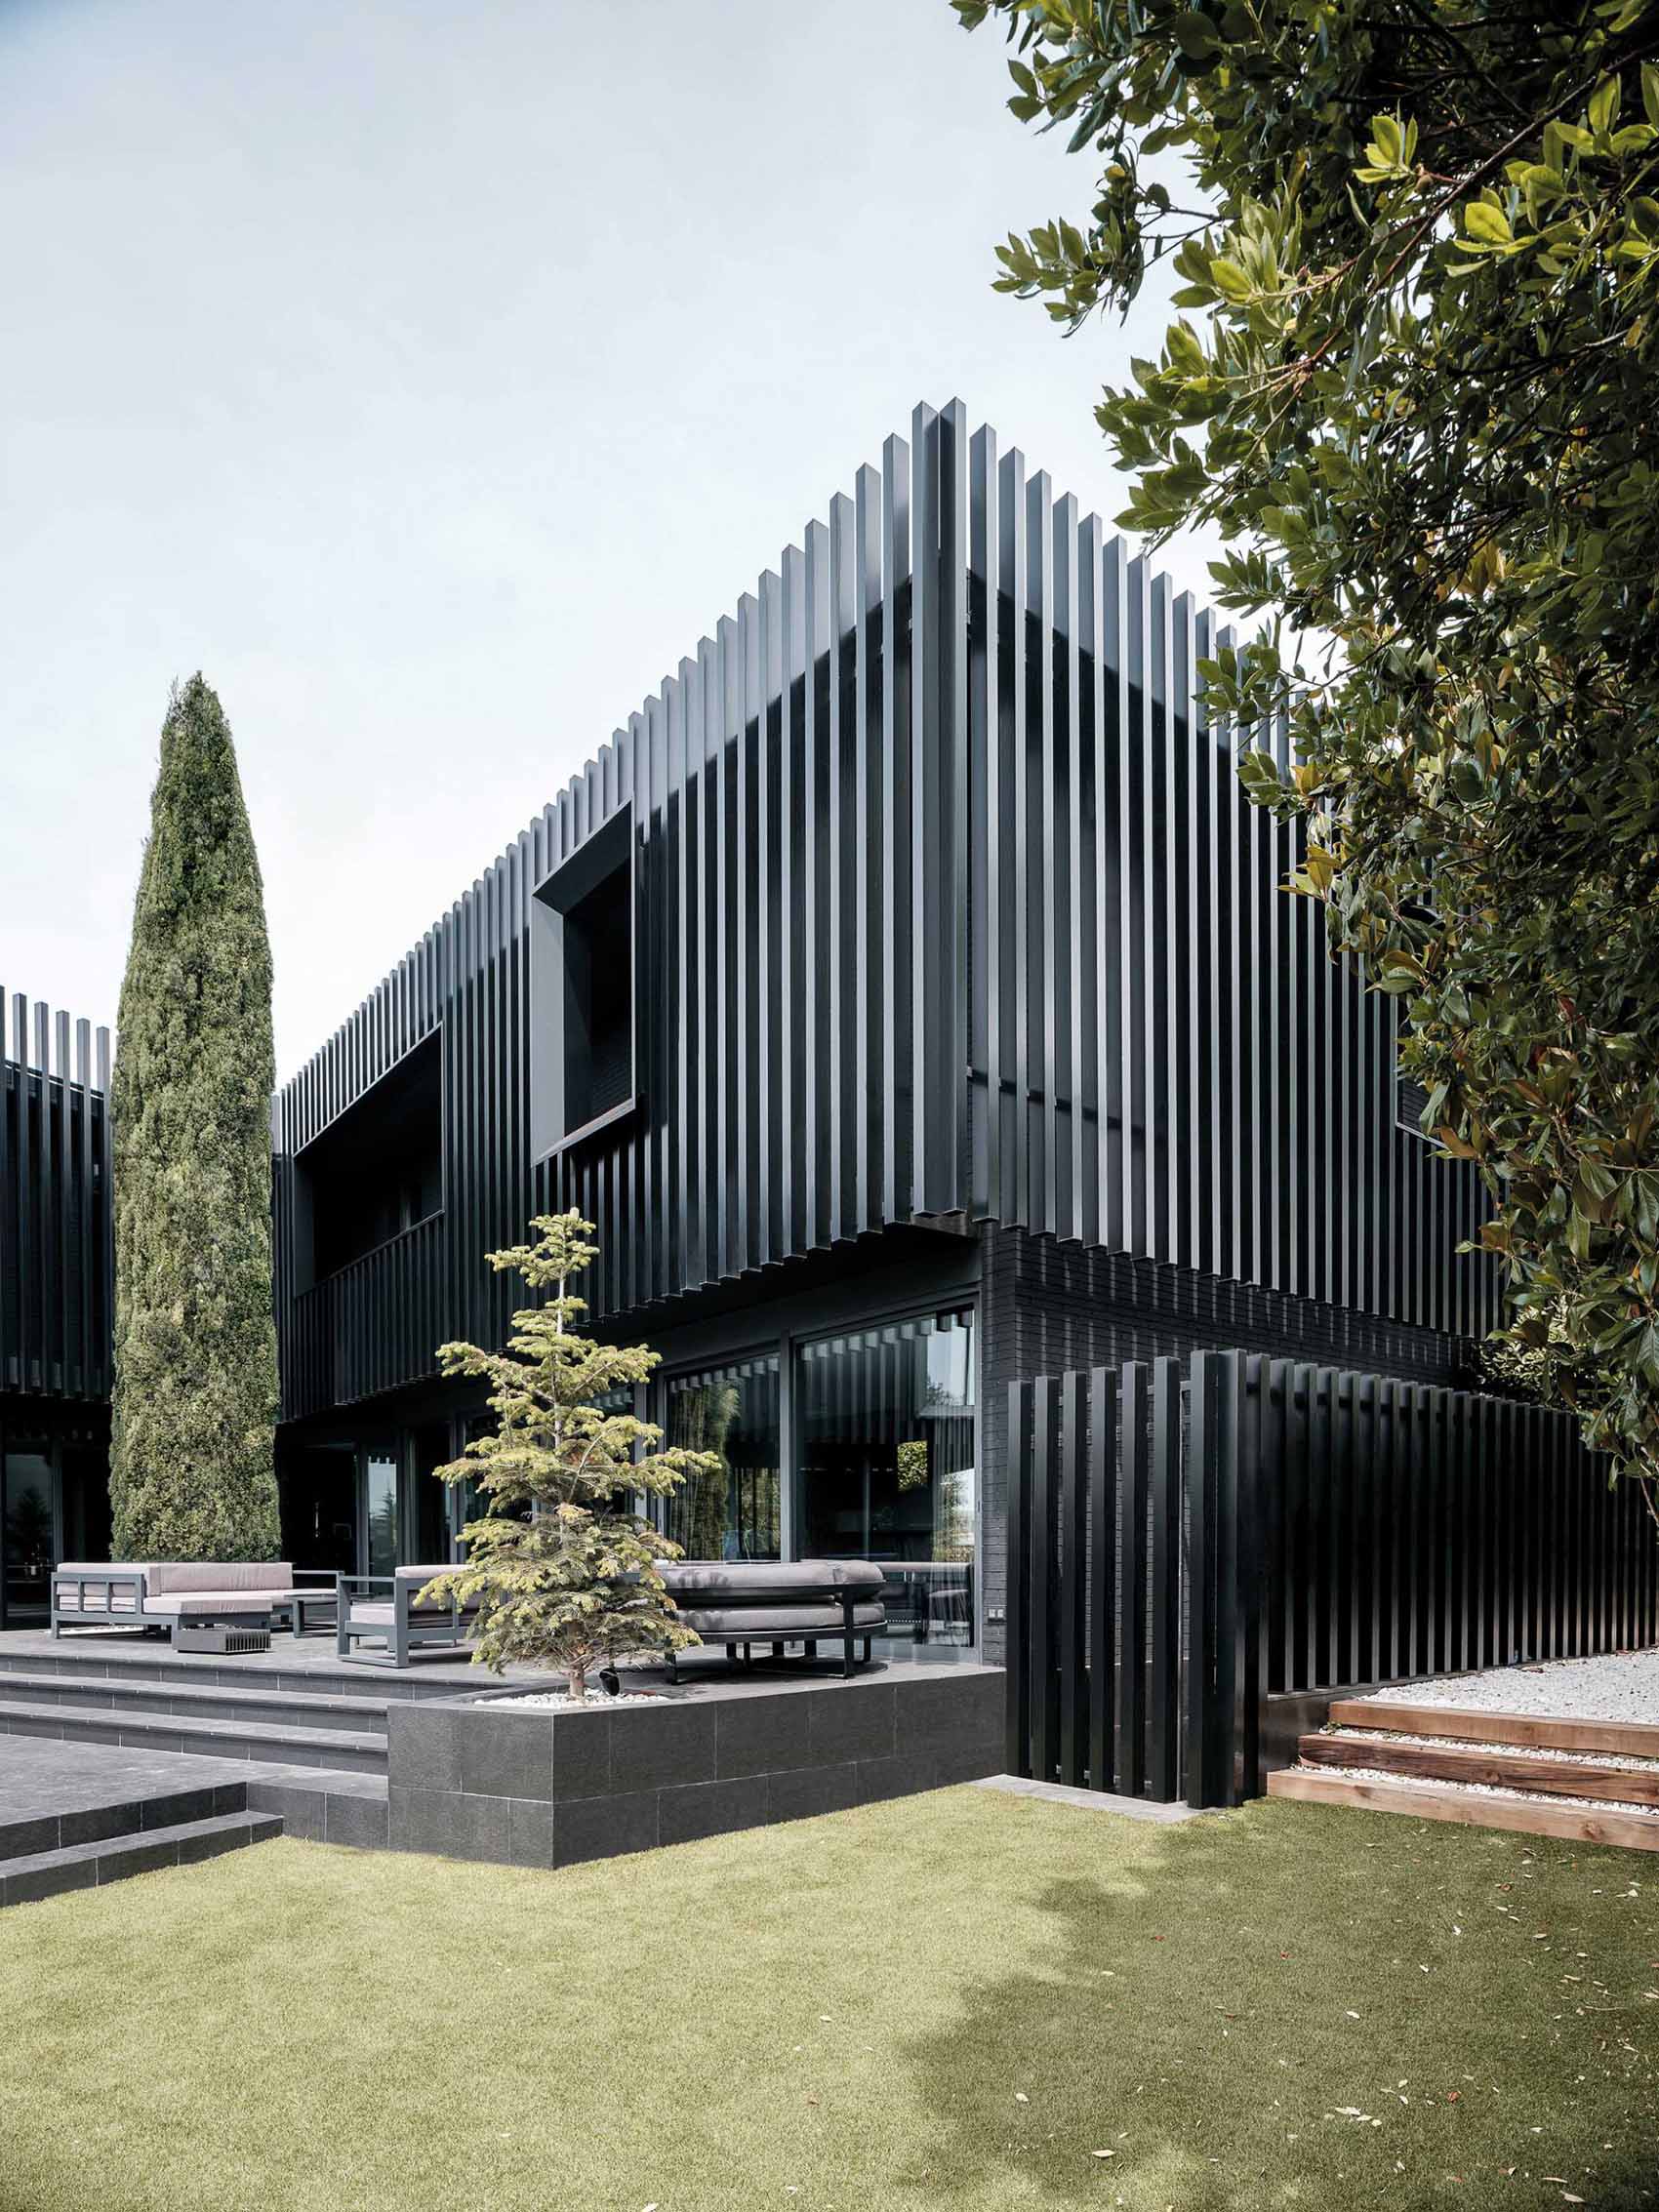 A modern black house has vertical planes that wrap around its exterior, creating a monochromatic appearance.